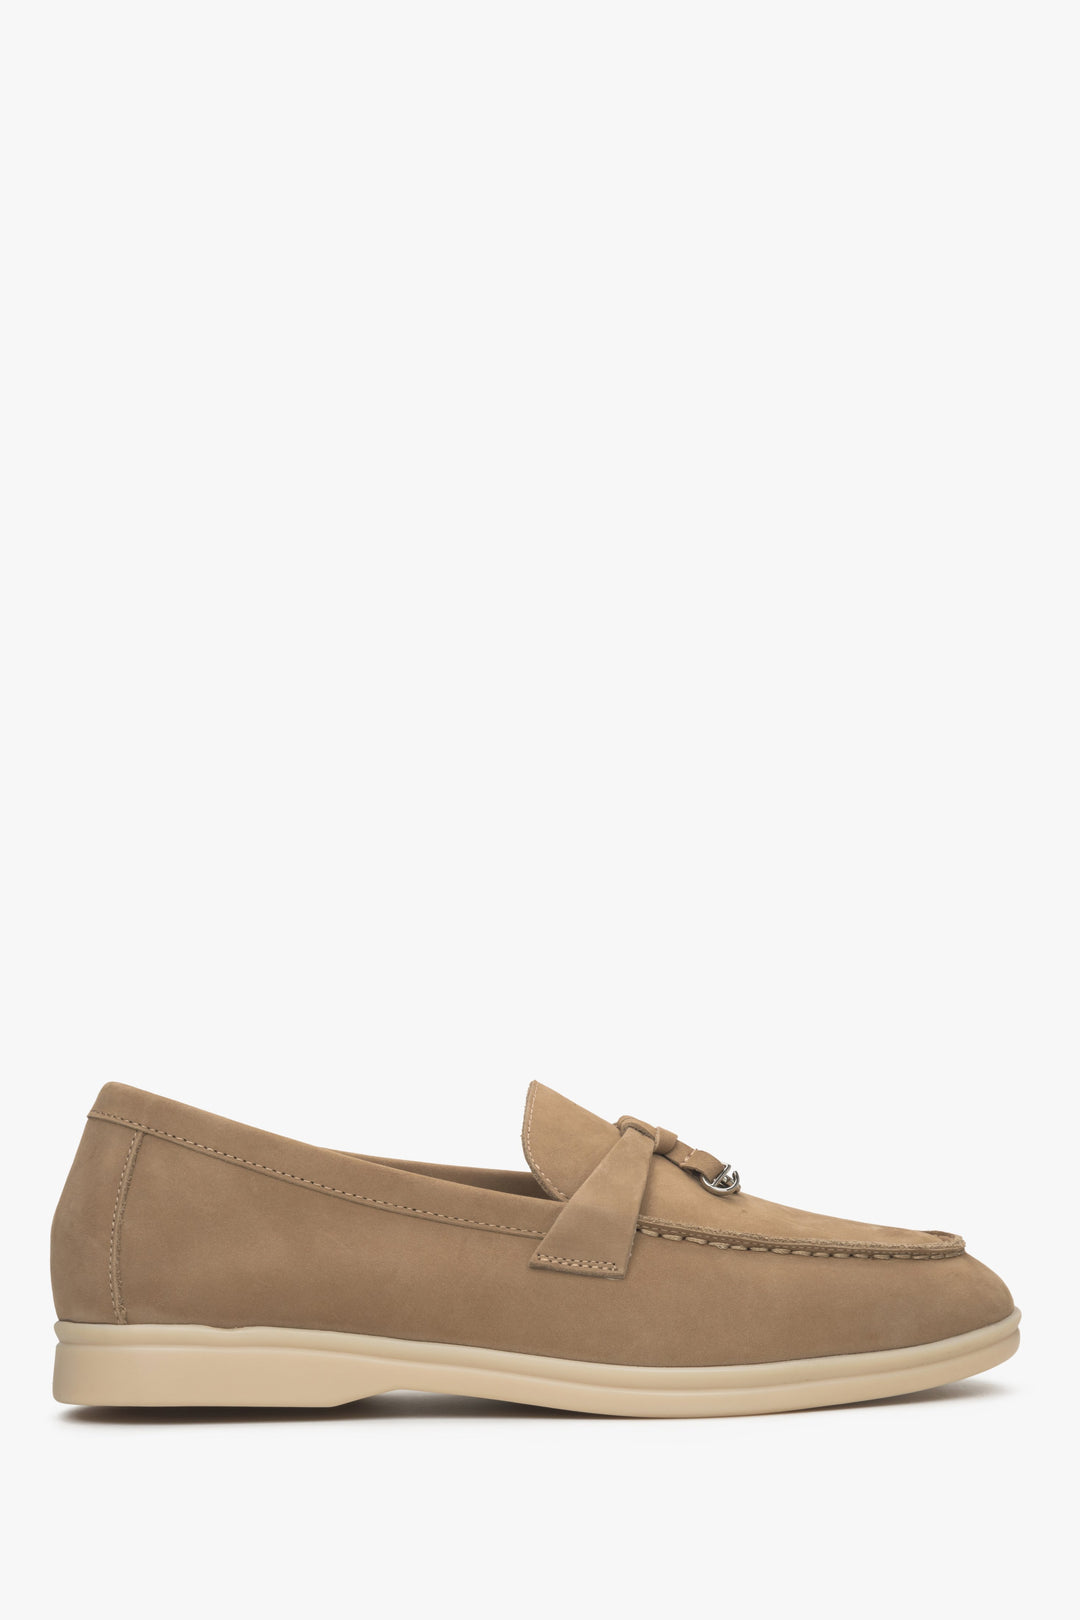 Women's brown tassel loafers made with nubuck Estro.